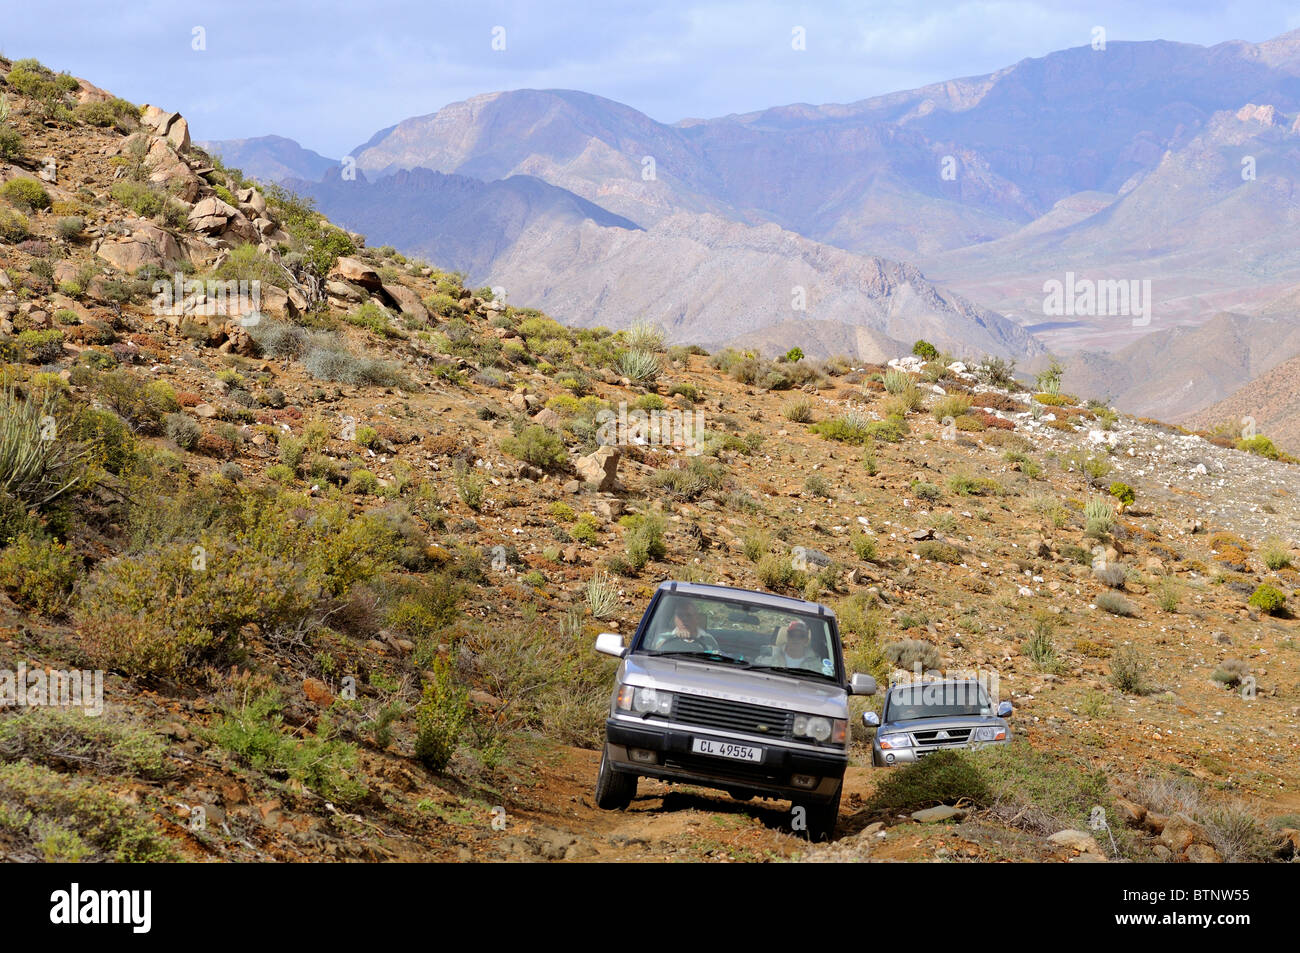 Off-road vehicle on a 4x4 track in the Richtersveld Transfrontier National Park, South Africa Stock Photo